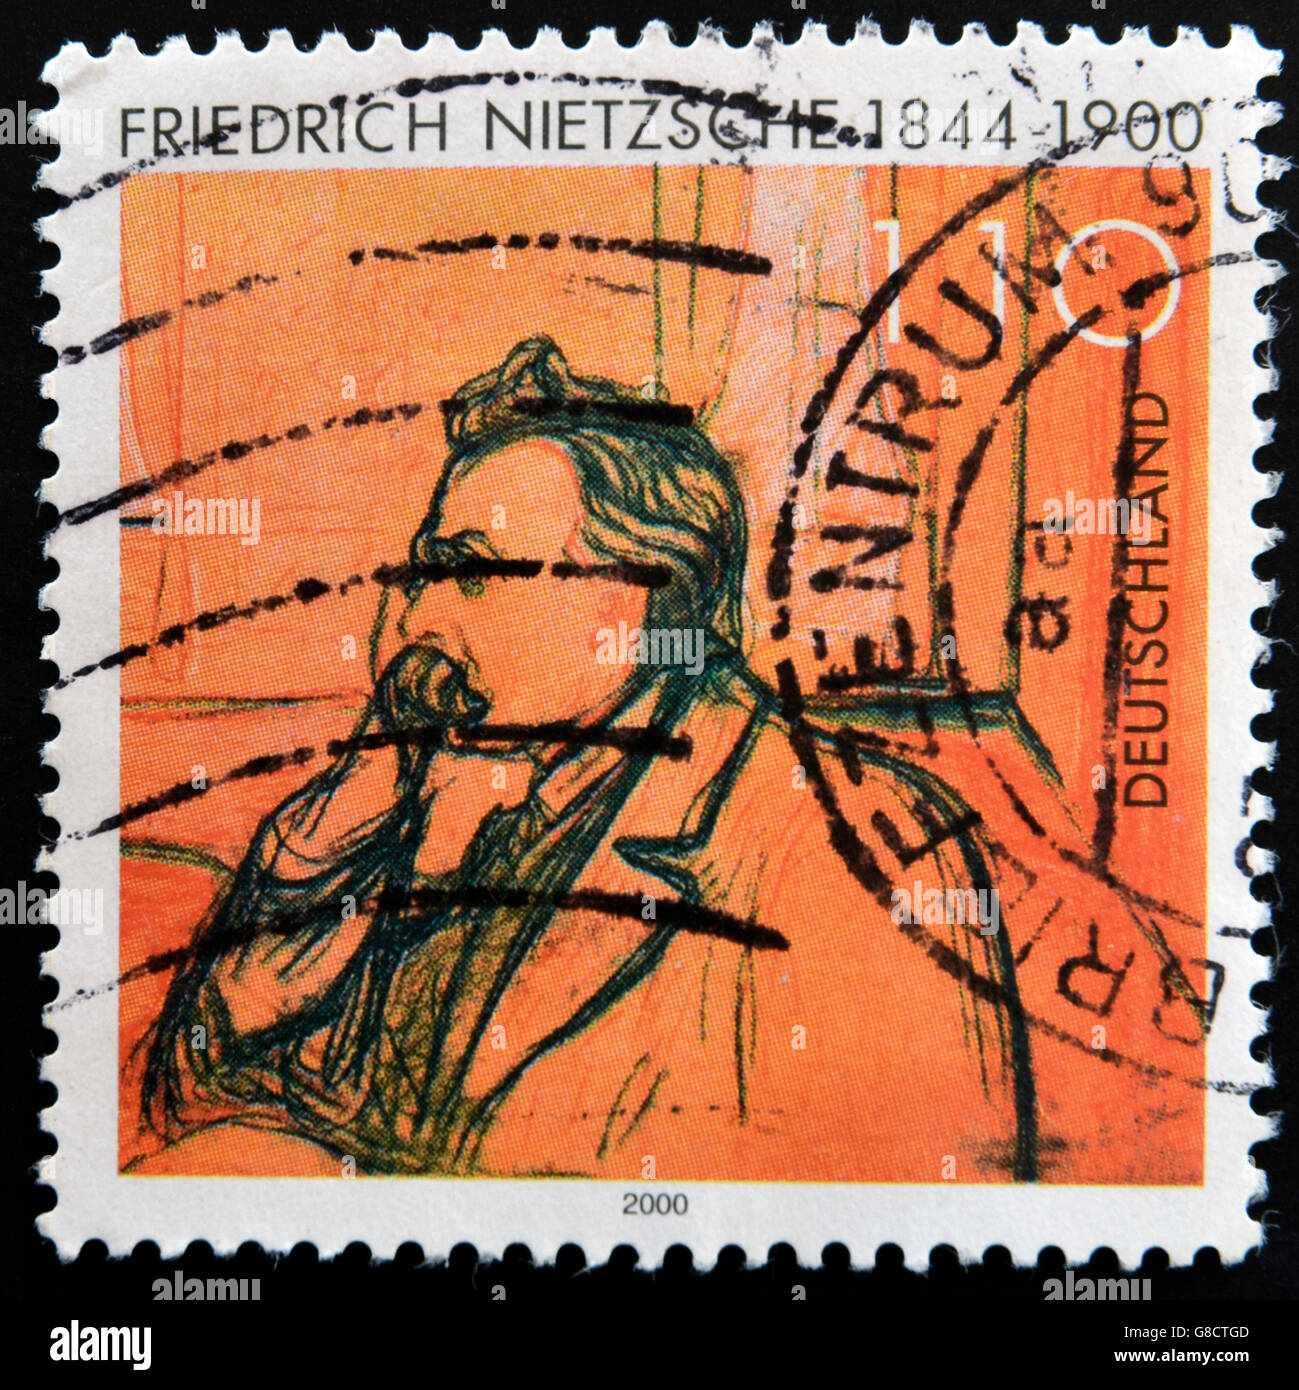 GERMANY - CIRCA 2000: A stamp printed in Germany shows Friedrich Nietzsche, circa 2000 Stock Photo